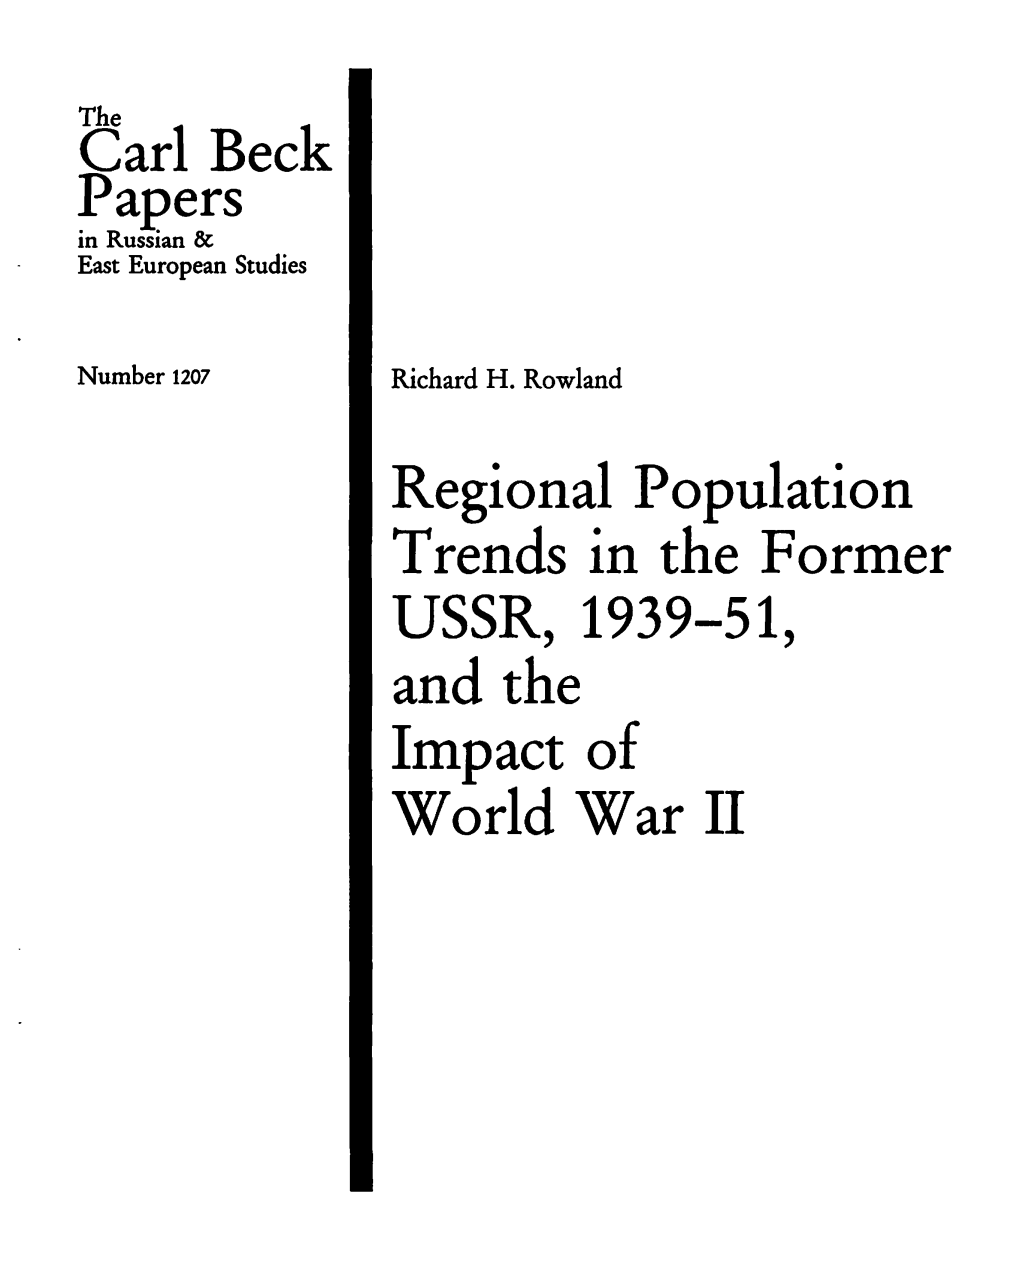 Papers Regional Population Trends in the Former USSR, 1939-51, And